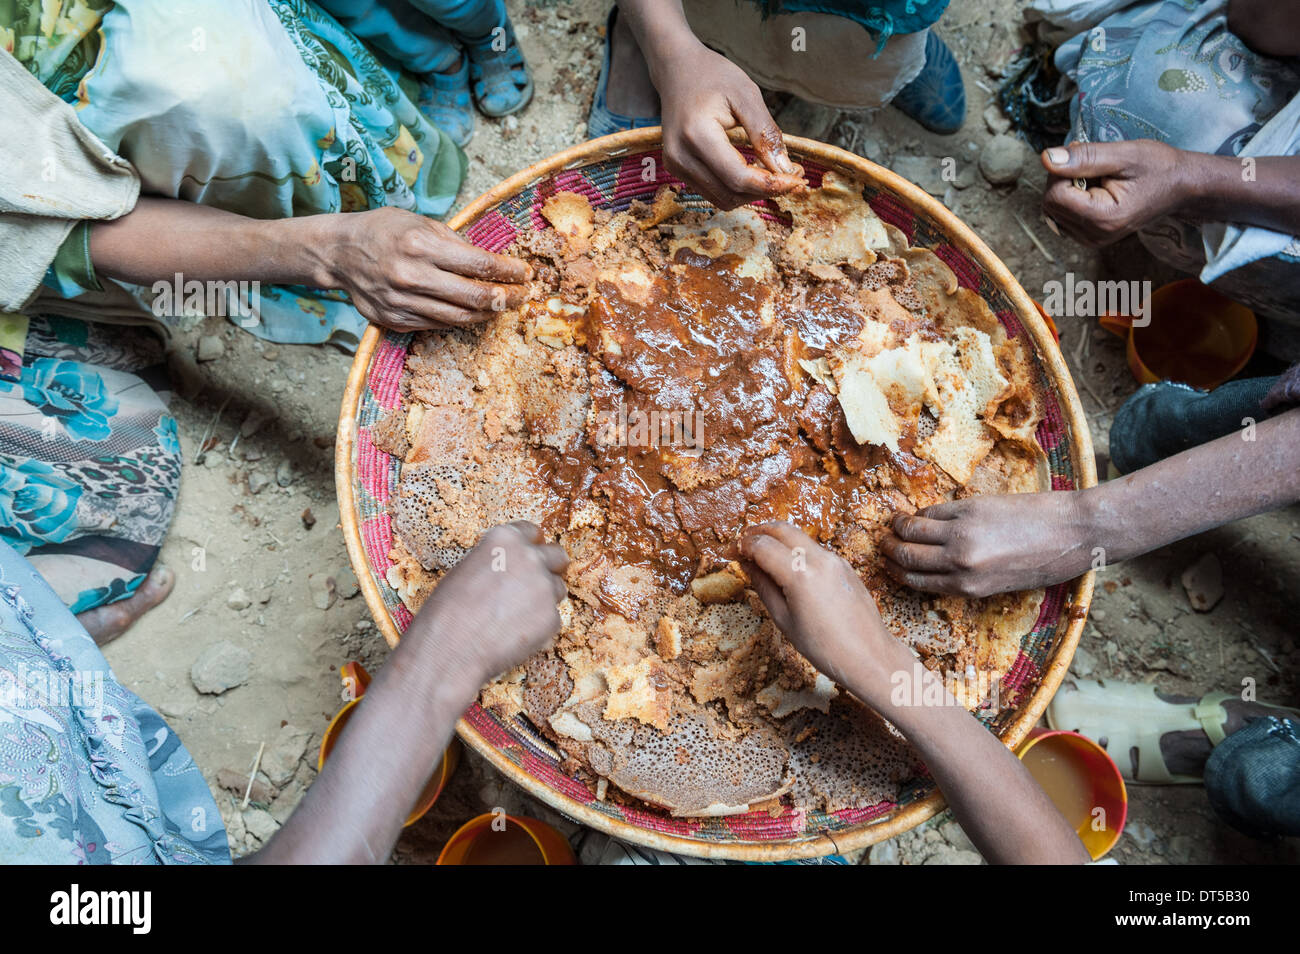 Hands of people sharing a traditional dish during a wedding celebration, Gheralta, Tigray, Ethiopia, Africa Stock Photo